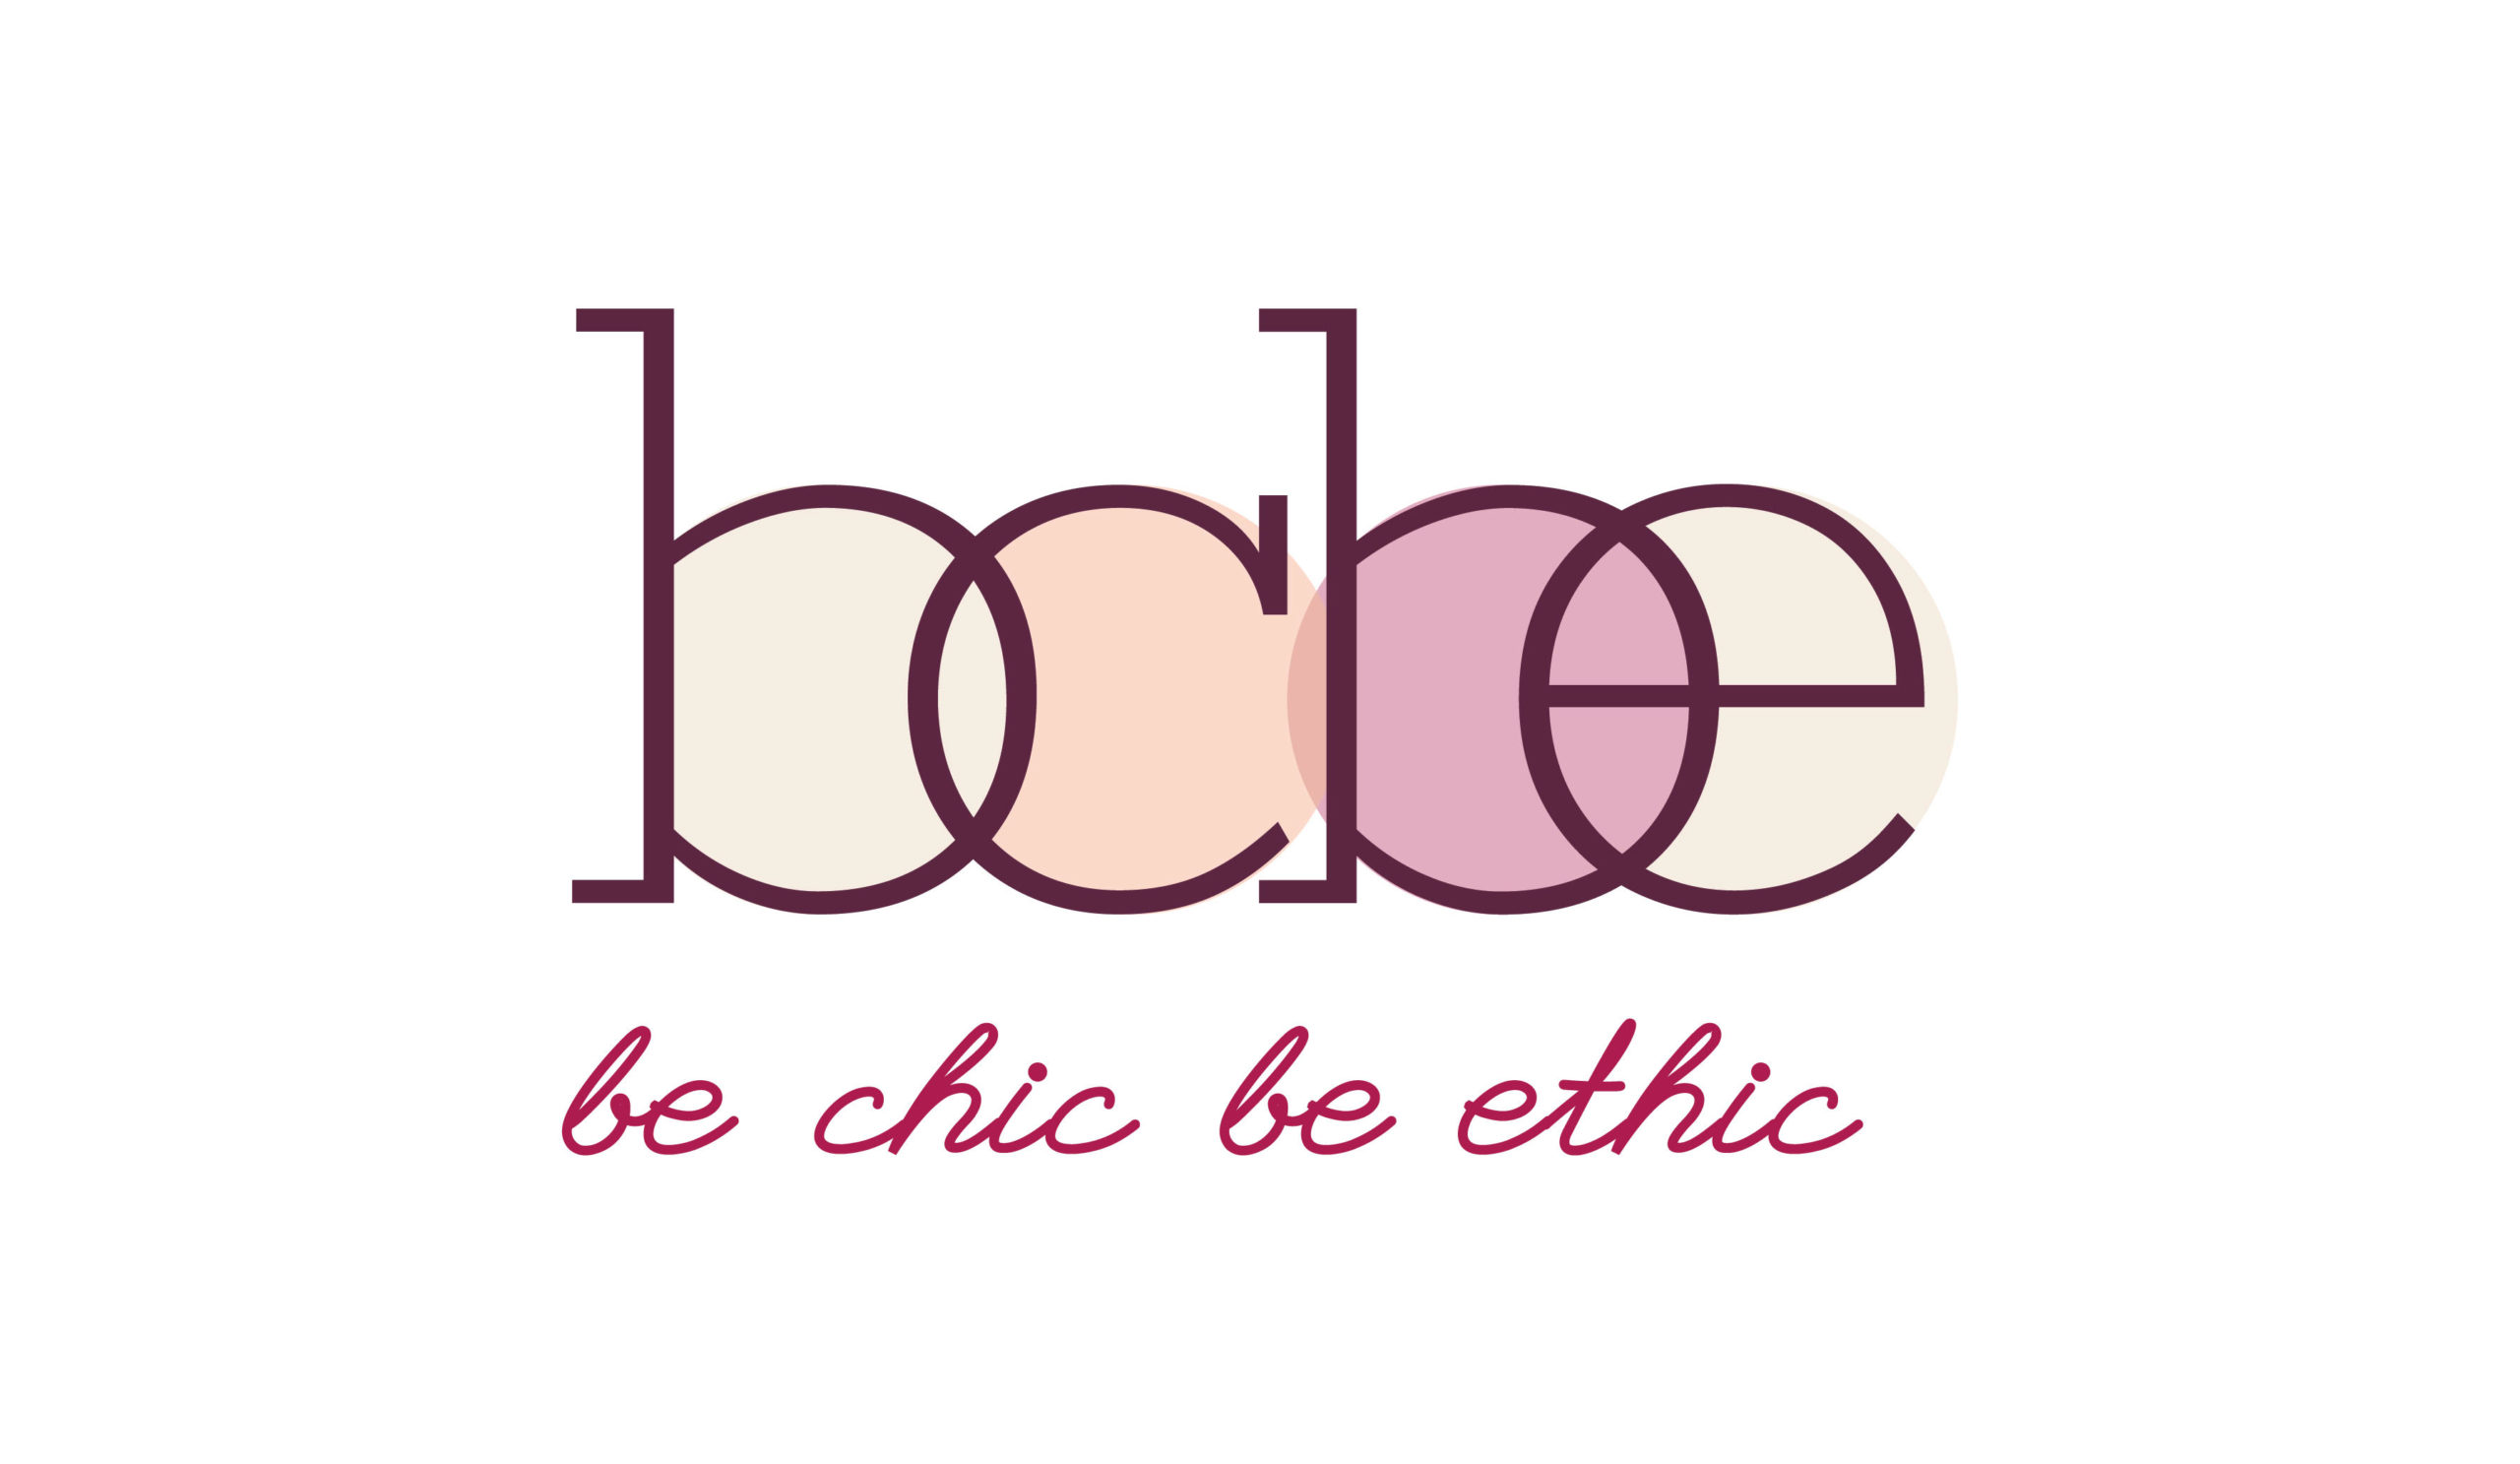 Be chic be ethic